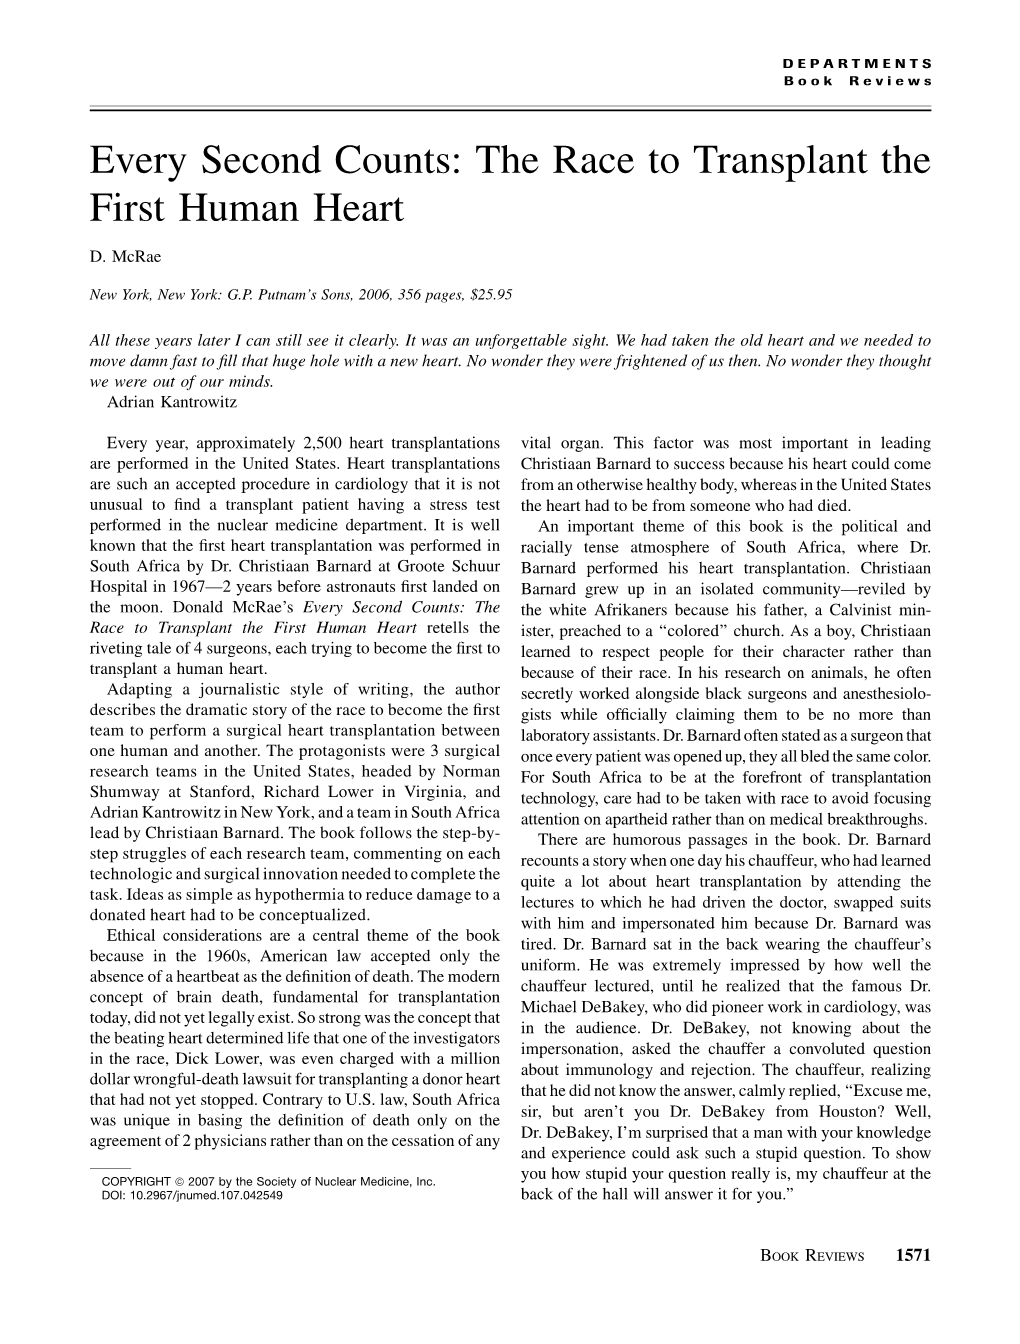 Every Second Counts: the Race to Transplant the First Human Heart